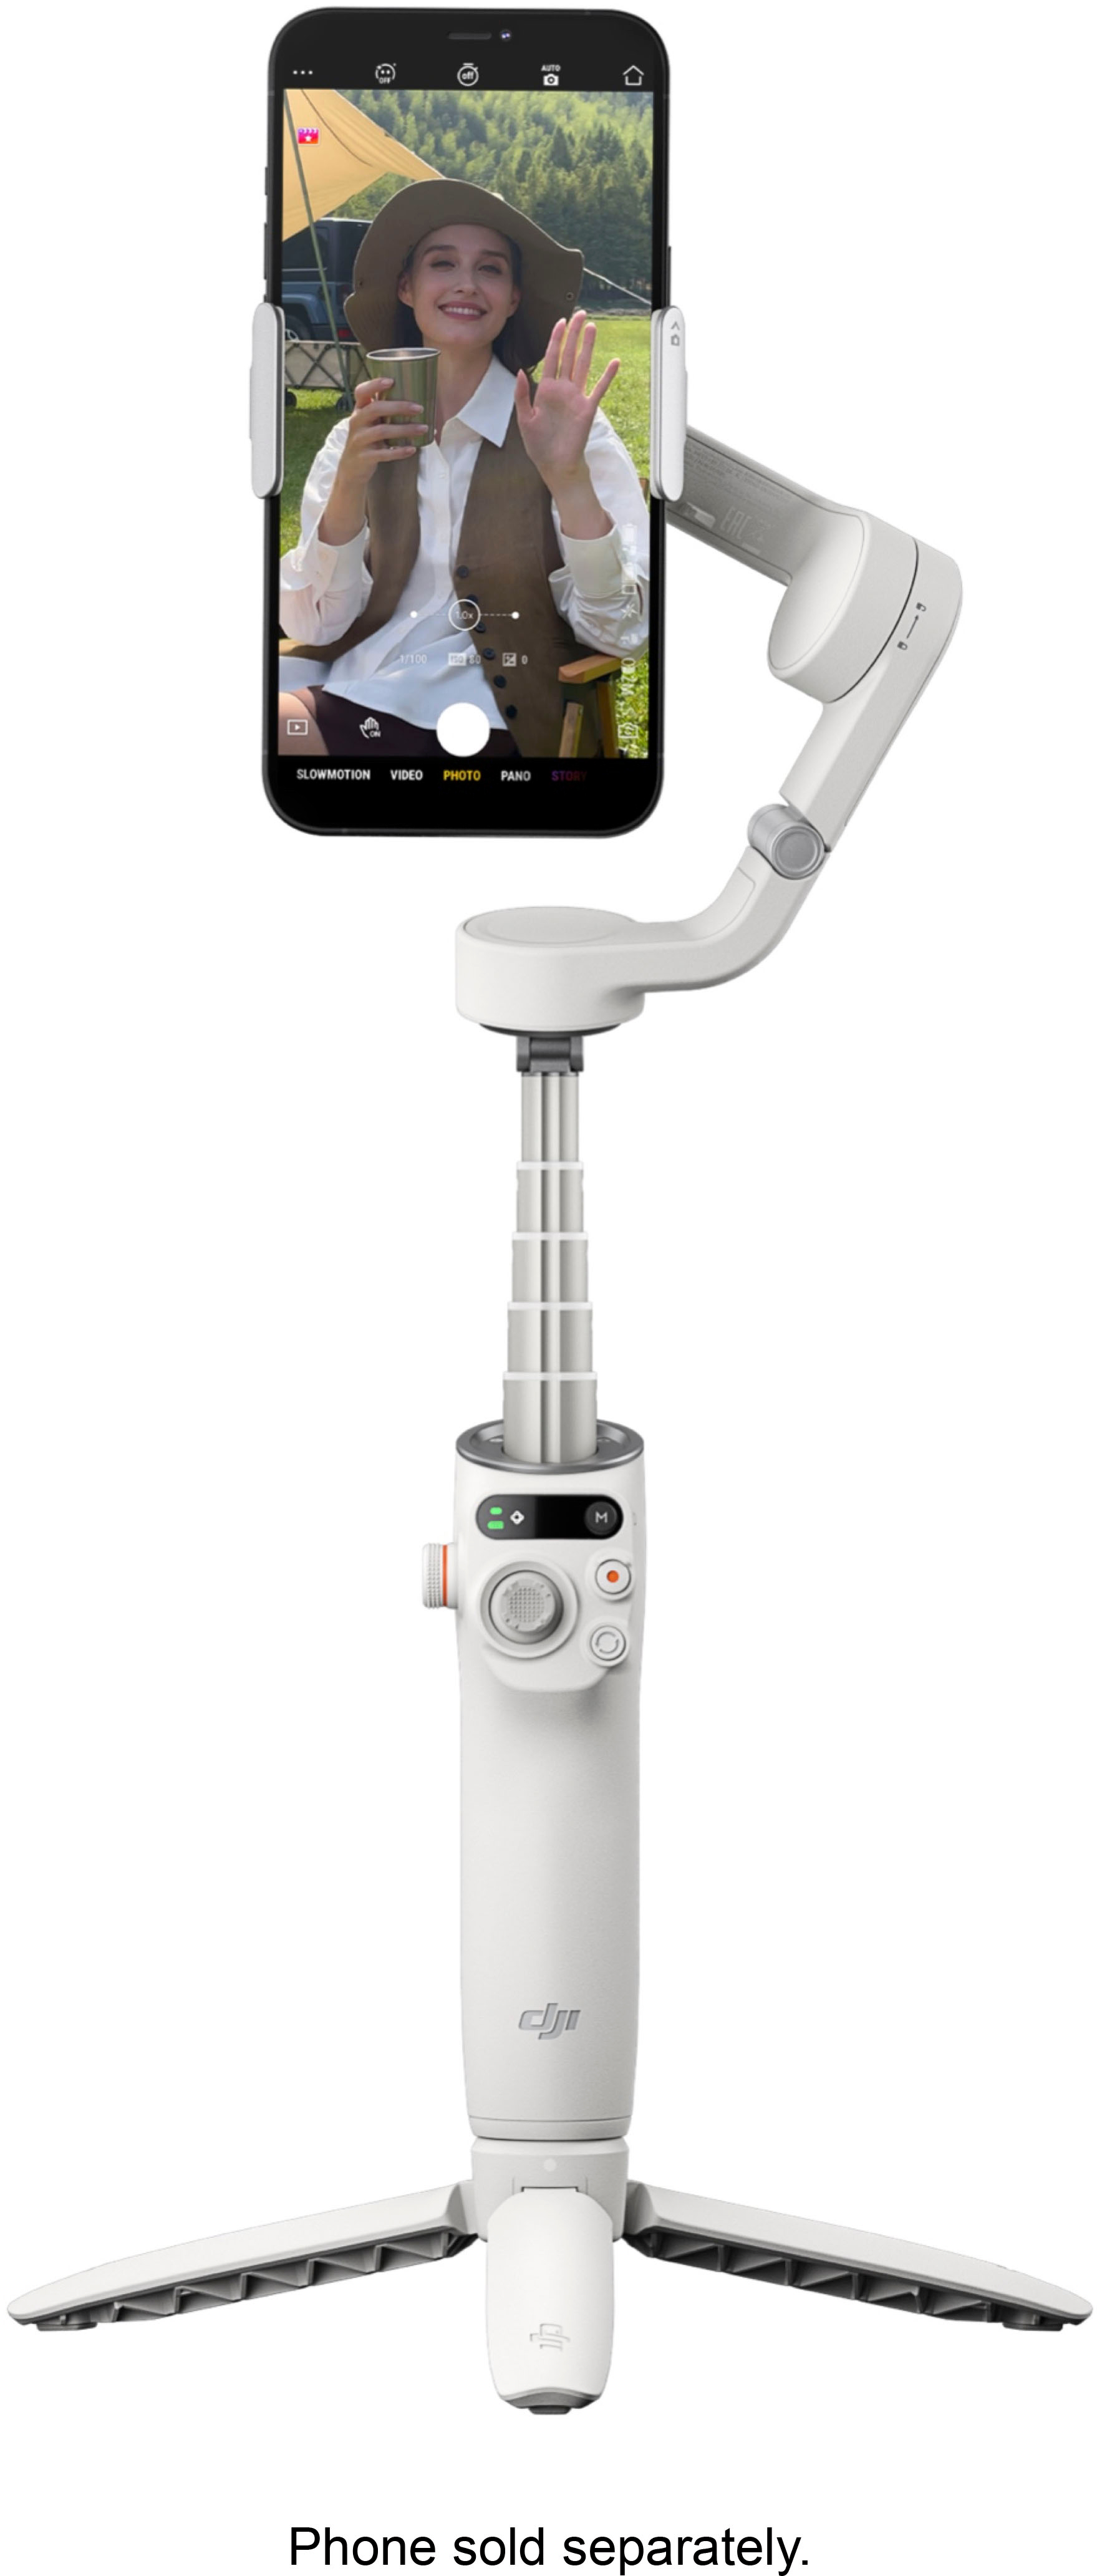 DJI Osmo Mobile 6 (Platinum Gray) Smartphone 3-Axis Gimbal Stabilizer  CP.OS.00000284.01 - Best Buy